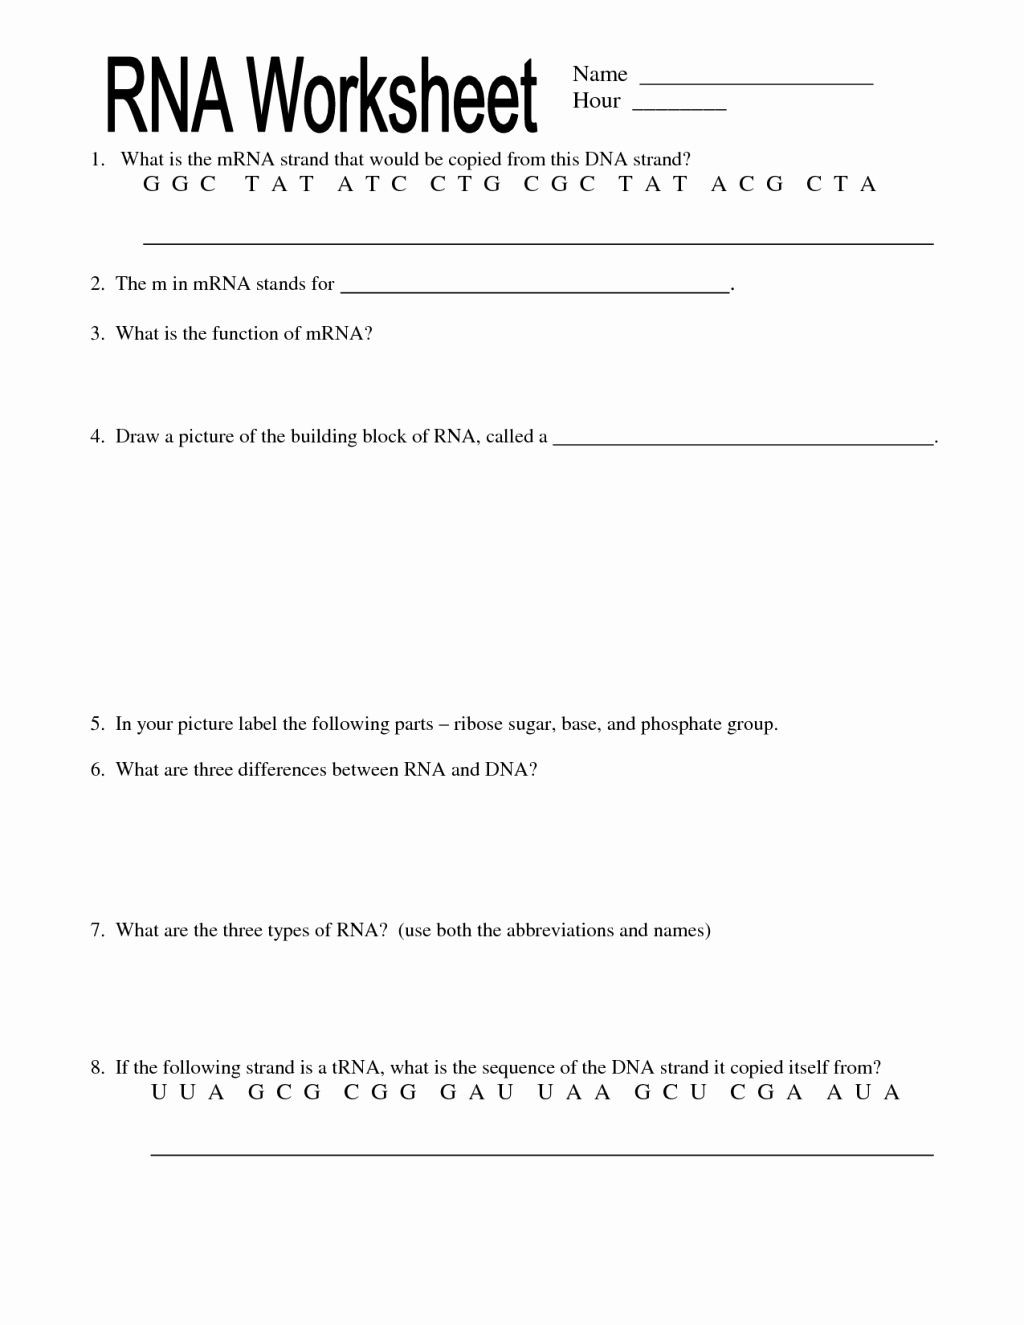 Dna and Rna Worksheet 50 Dna and Rna Worksheet Answers In 2020